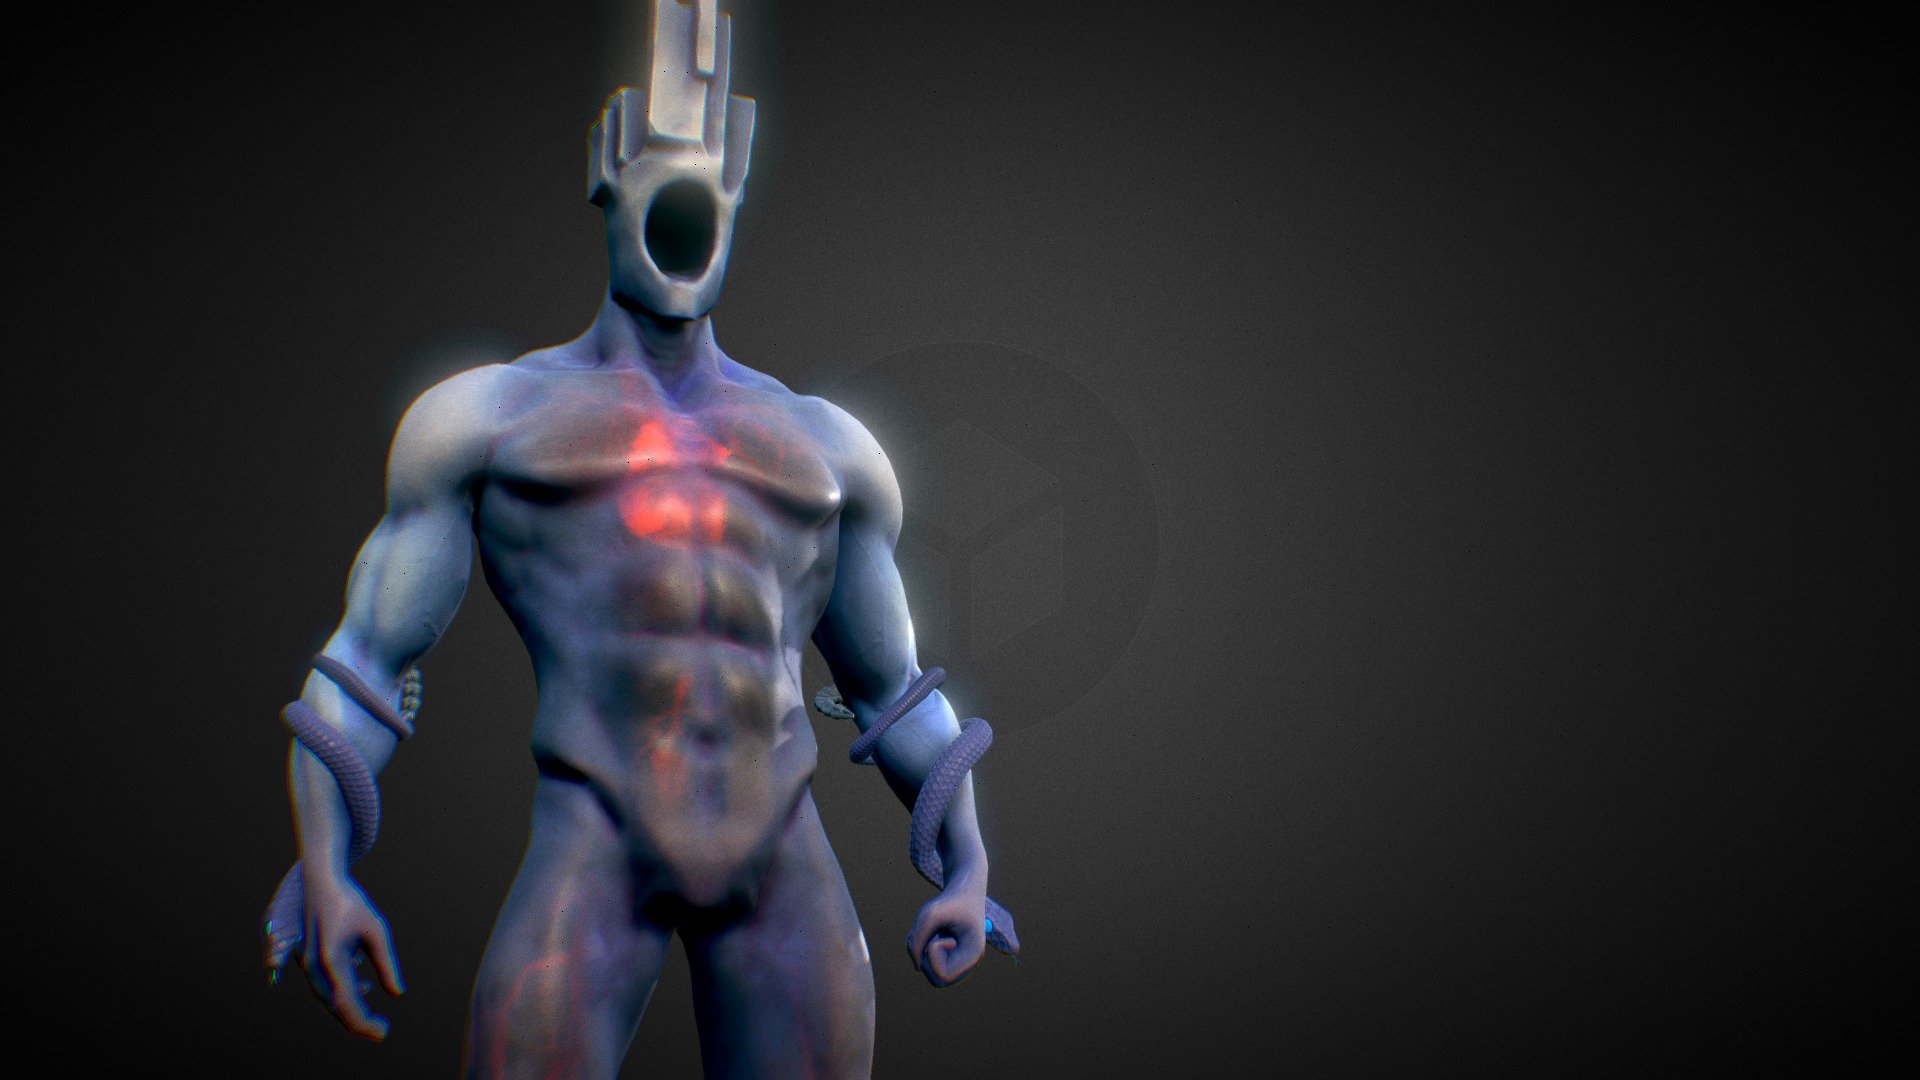 hello!
Here is more fanart of ULTRAKILL, this time of Minos Prime!

Models, textures and rigging by me.

Heart model created by https://sketchfab.com/neshallads

Hearty thank you to https://twitter.com/DragonRoIlZ for generally being a great help.
Thank you very much to the 3DFT community for offering feedback and advice - ULTRAKILL - Minos Prime - 3D model by dotflare 3d model